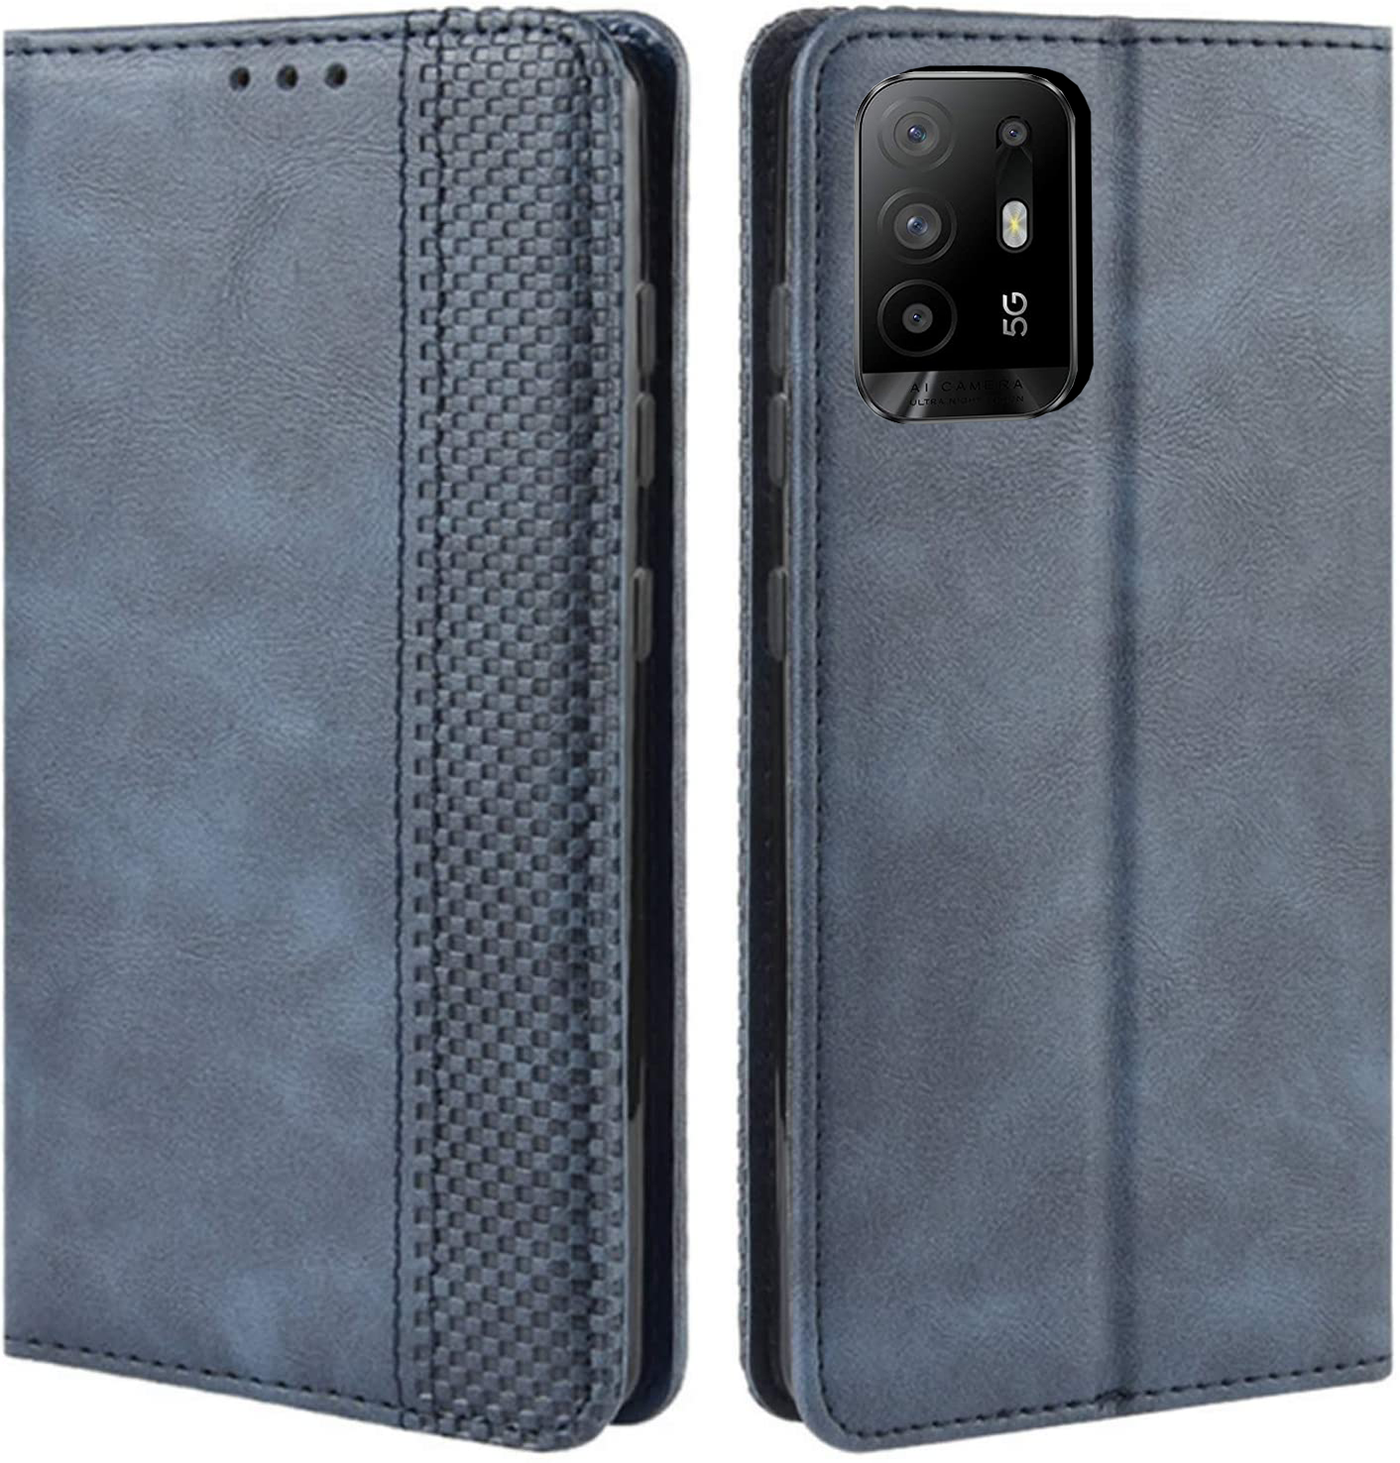 Oppo F19 Pro Plus blue color leather wallet flip cover case By excelsior